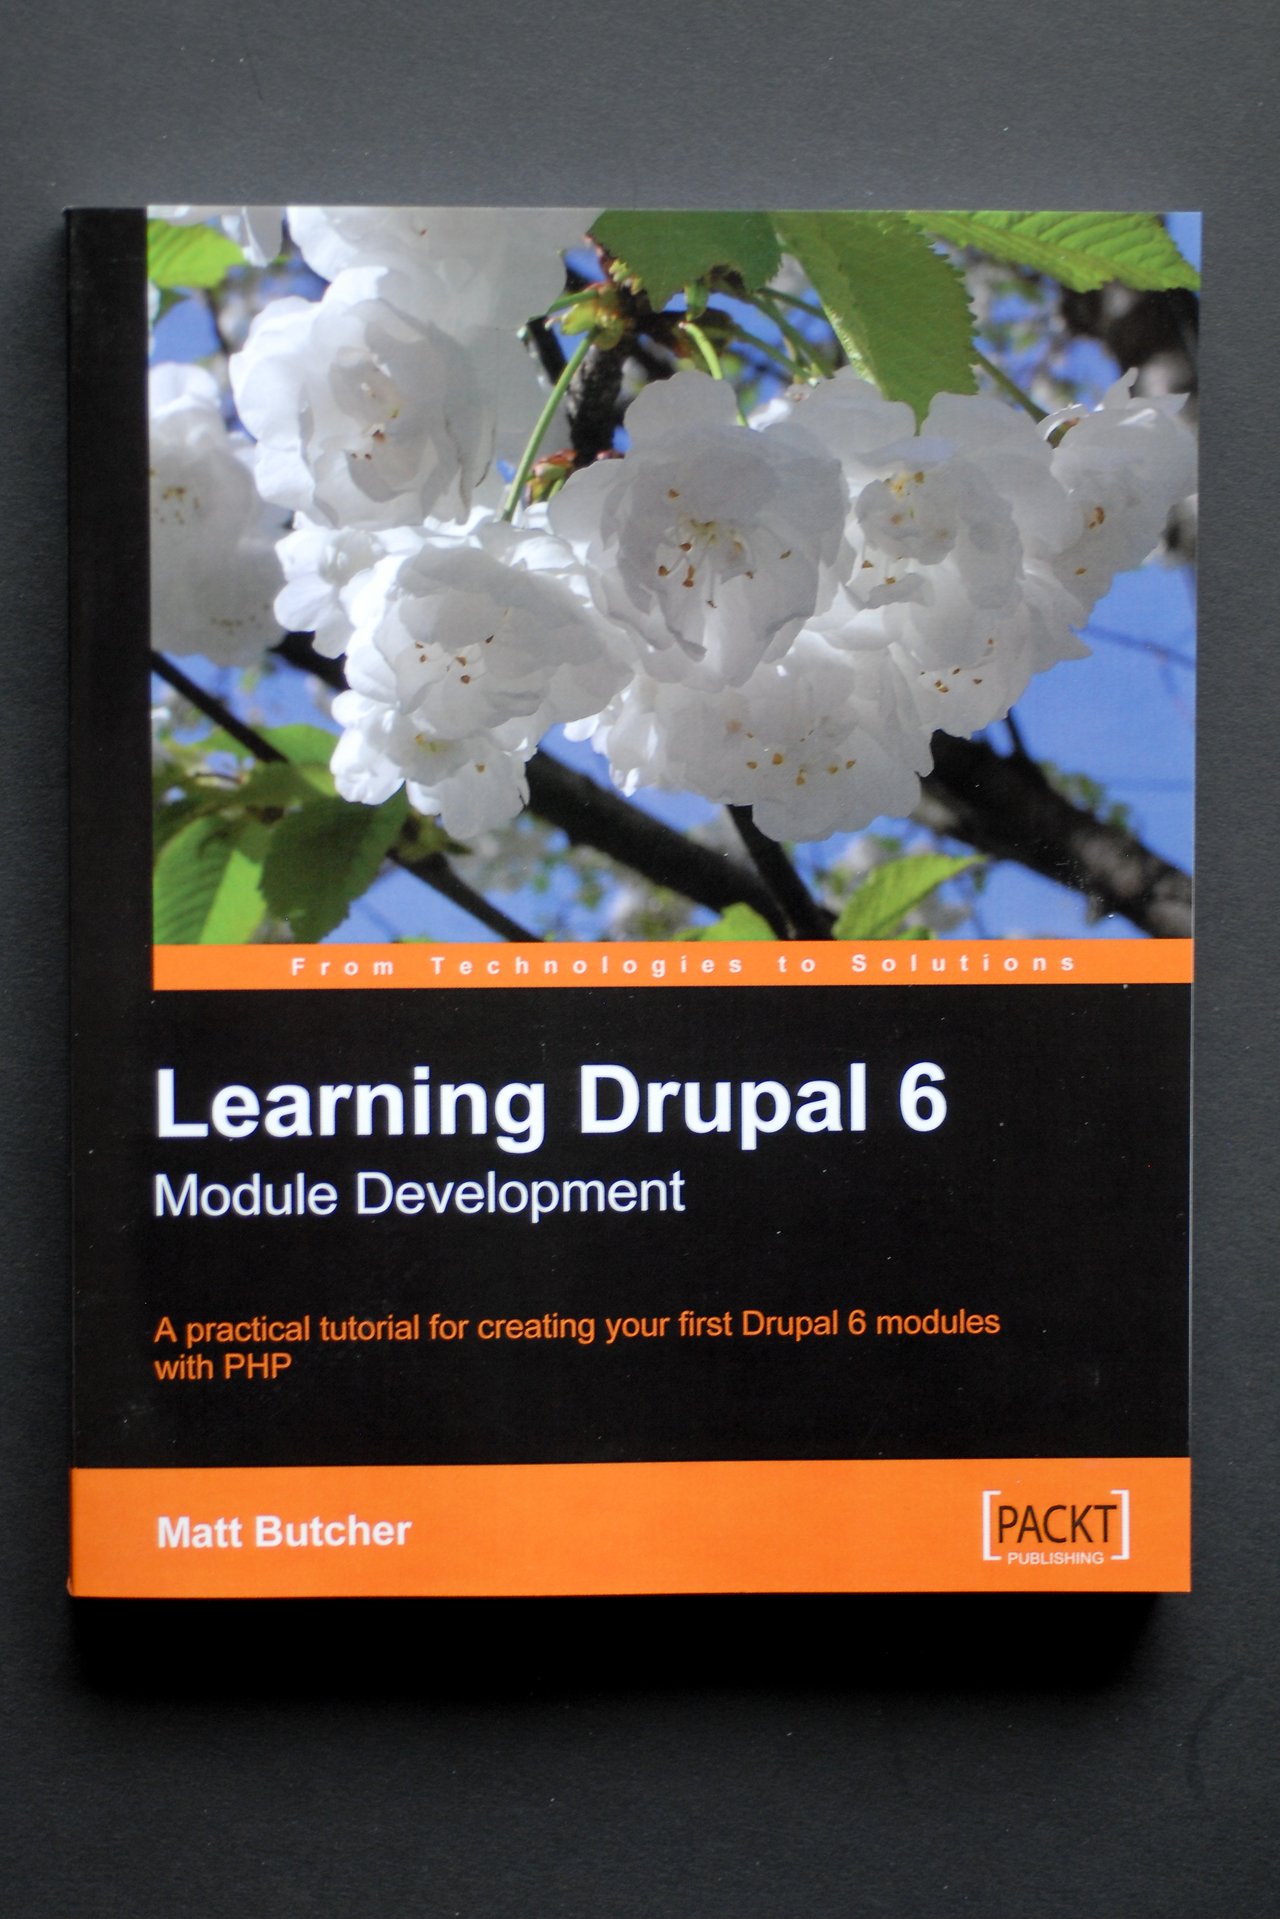 Book packt drupal6 learning